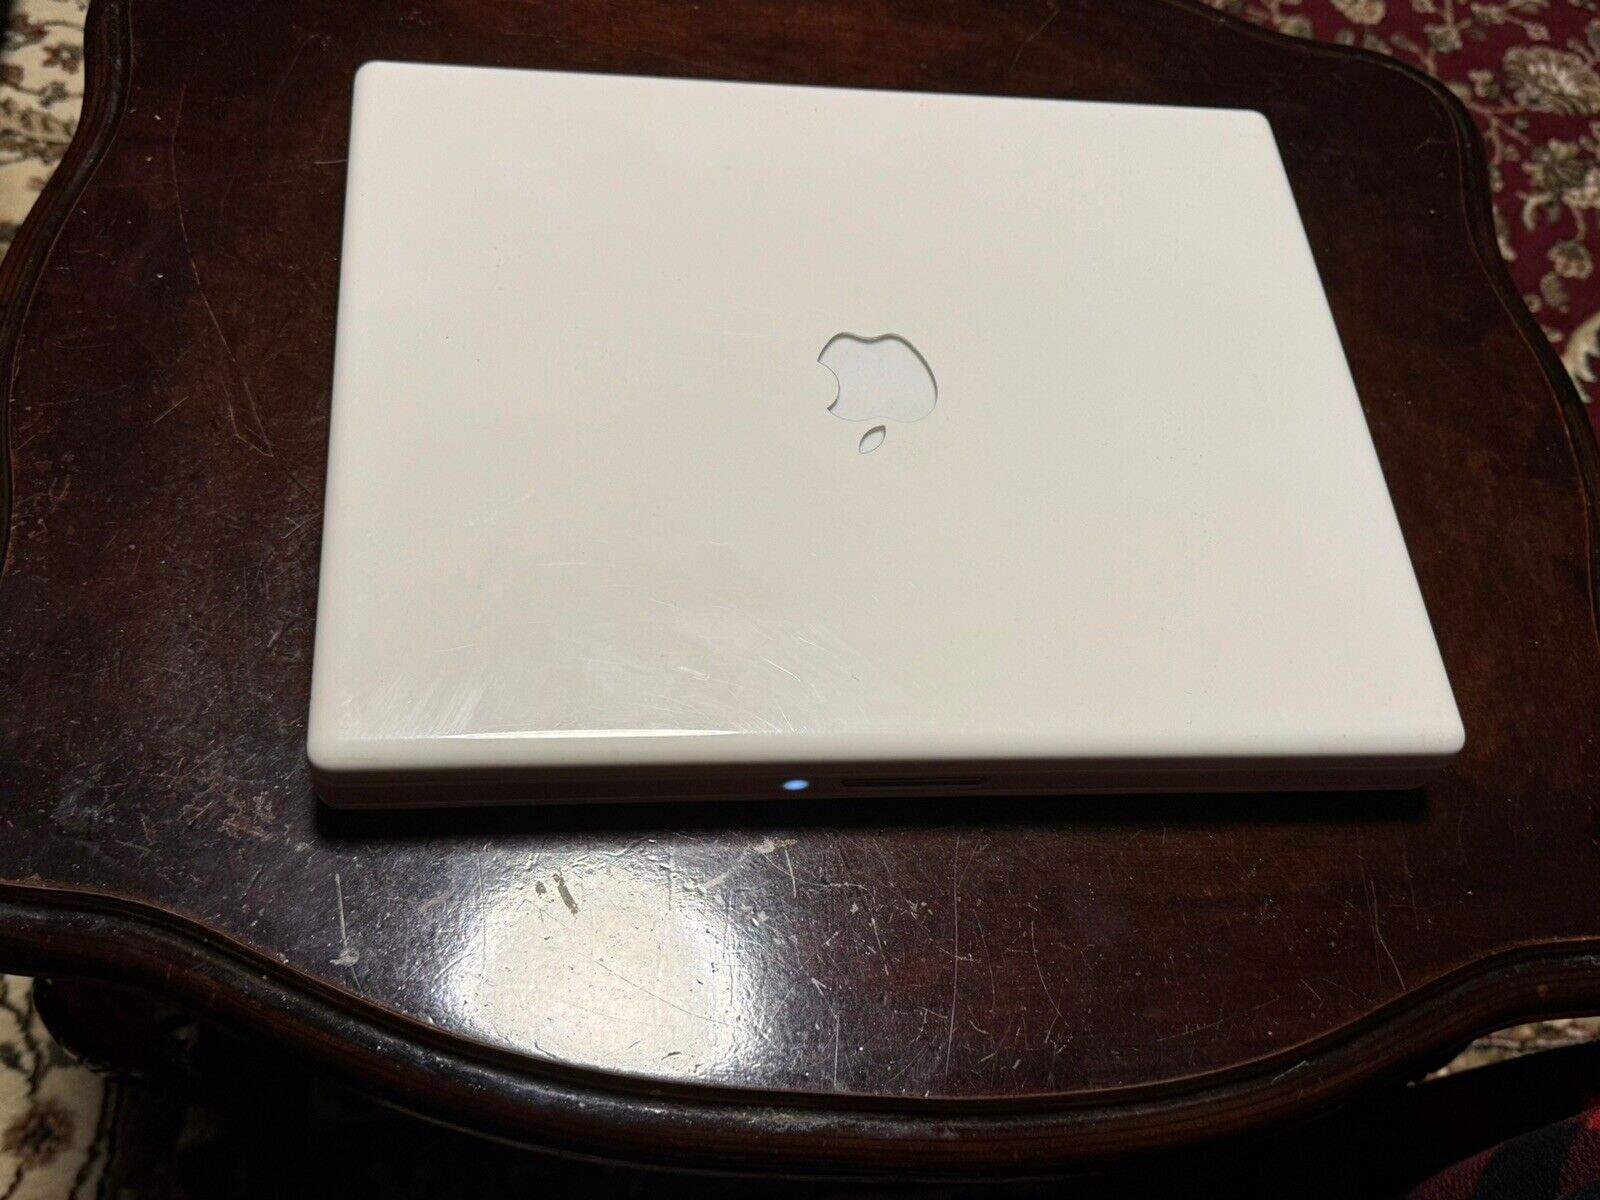 Apple iBook G4 12-inch Laptop - 1.42GHz, 60GB HDD, 1.5GB Ram - Vintage From 2005